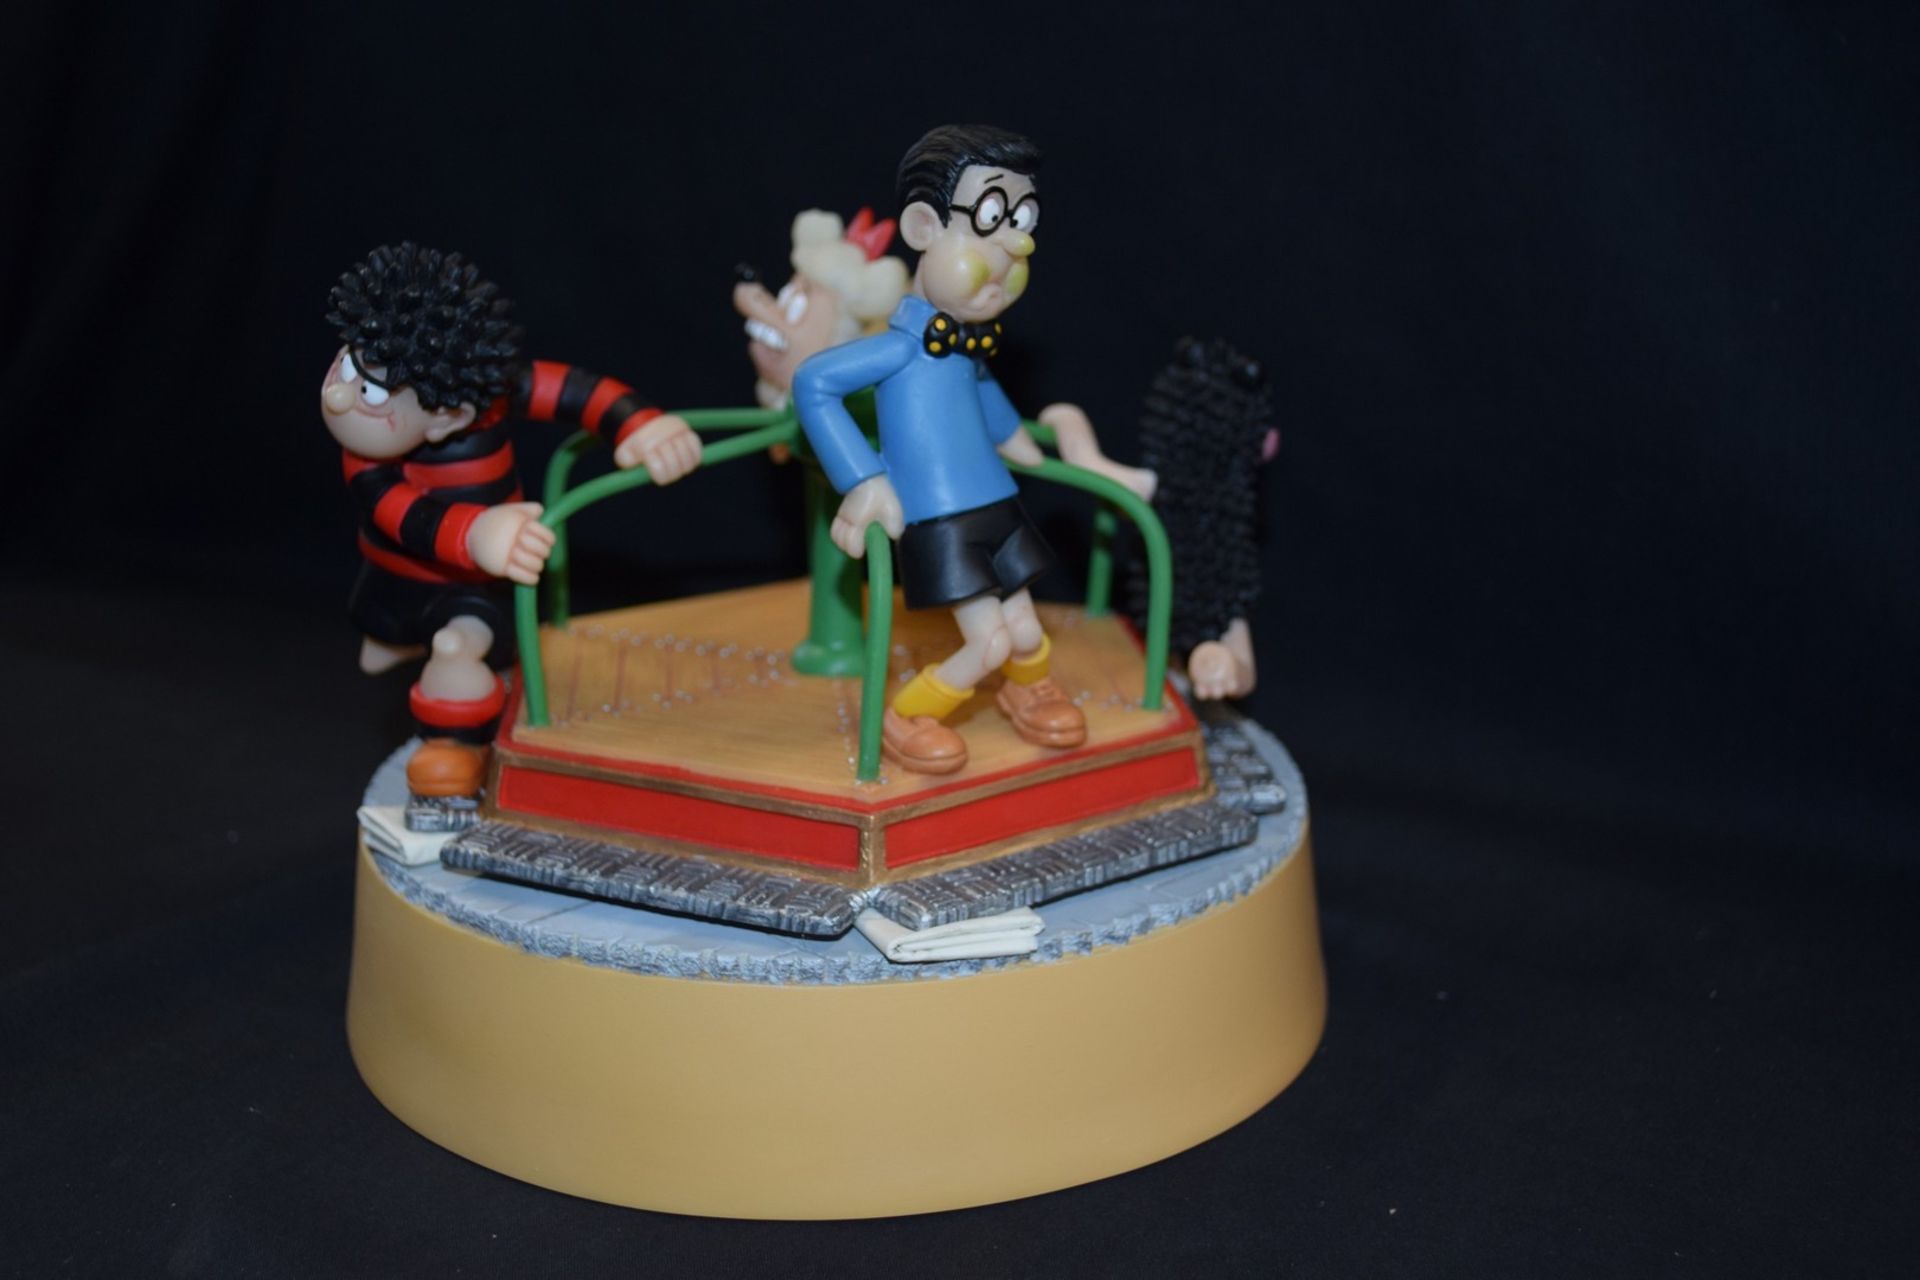 Boxed Robert Harrop Figure, The roundabout rascals, year 2005, Ref BDMB1 Limited ed. of 1000 - Image 2 of 3